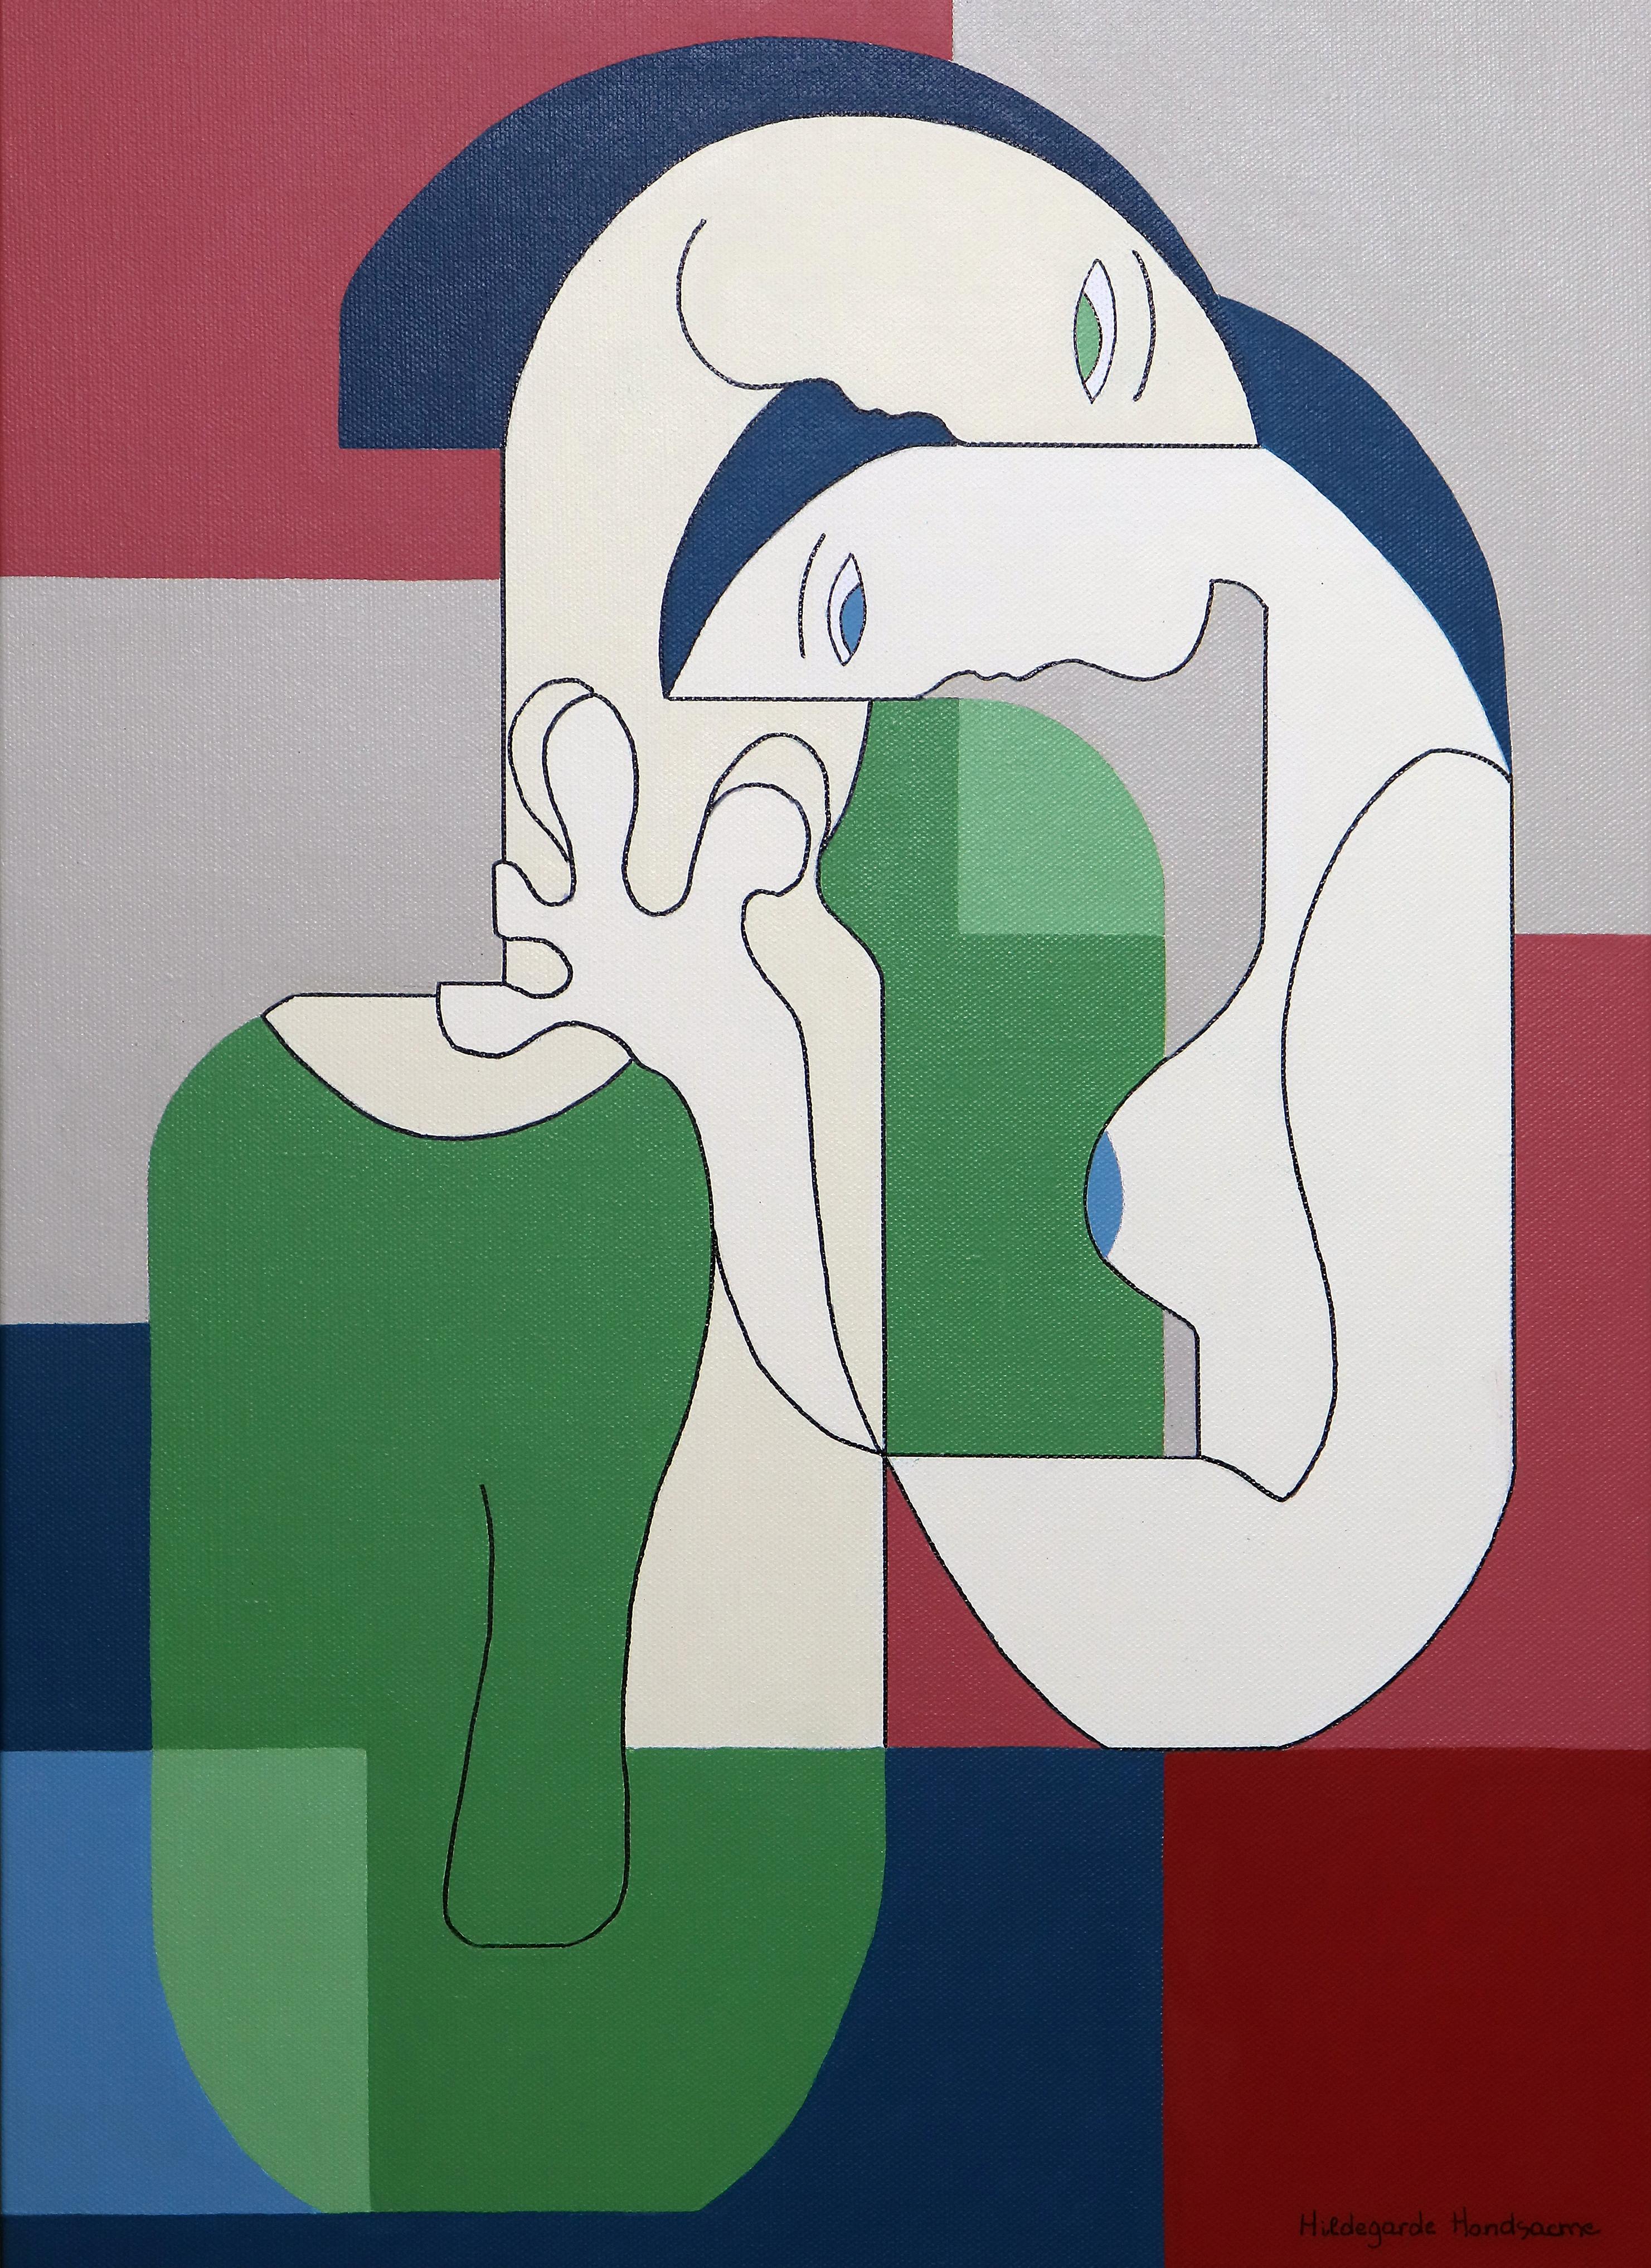 Hildegarde Handsaeme Abstract Painting - Reciproco, Contemporary Abstract Geometric Painting Canvas Cubism Portrait Green